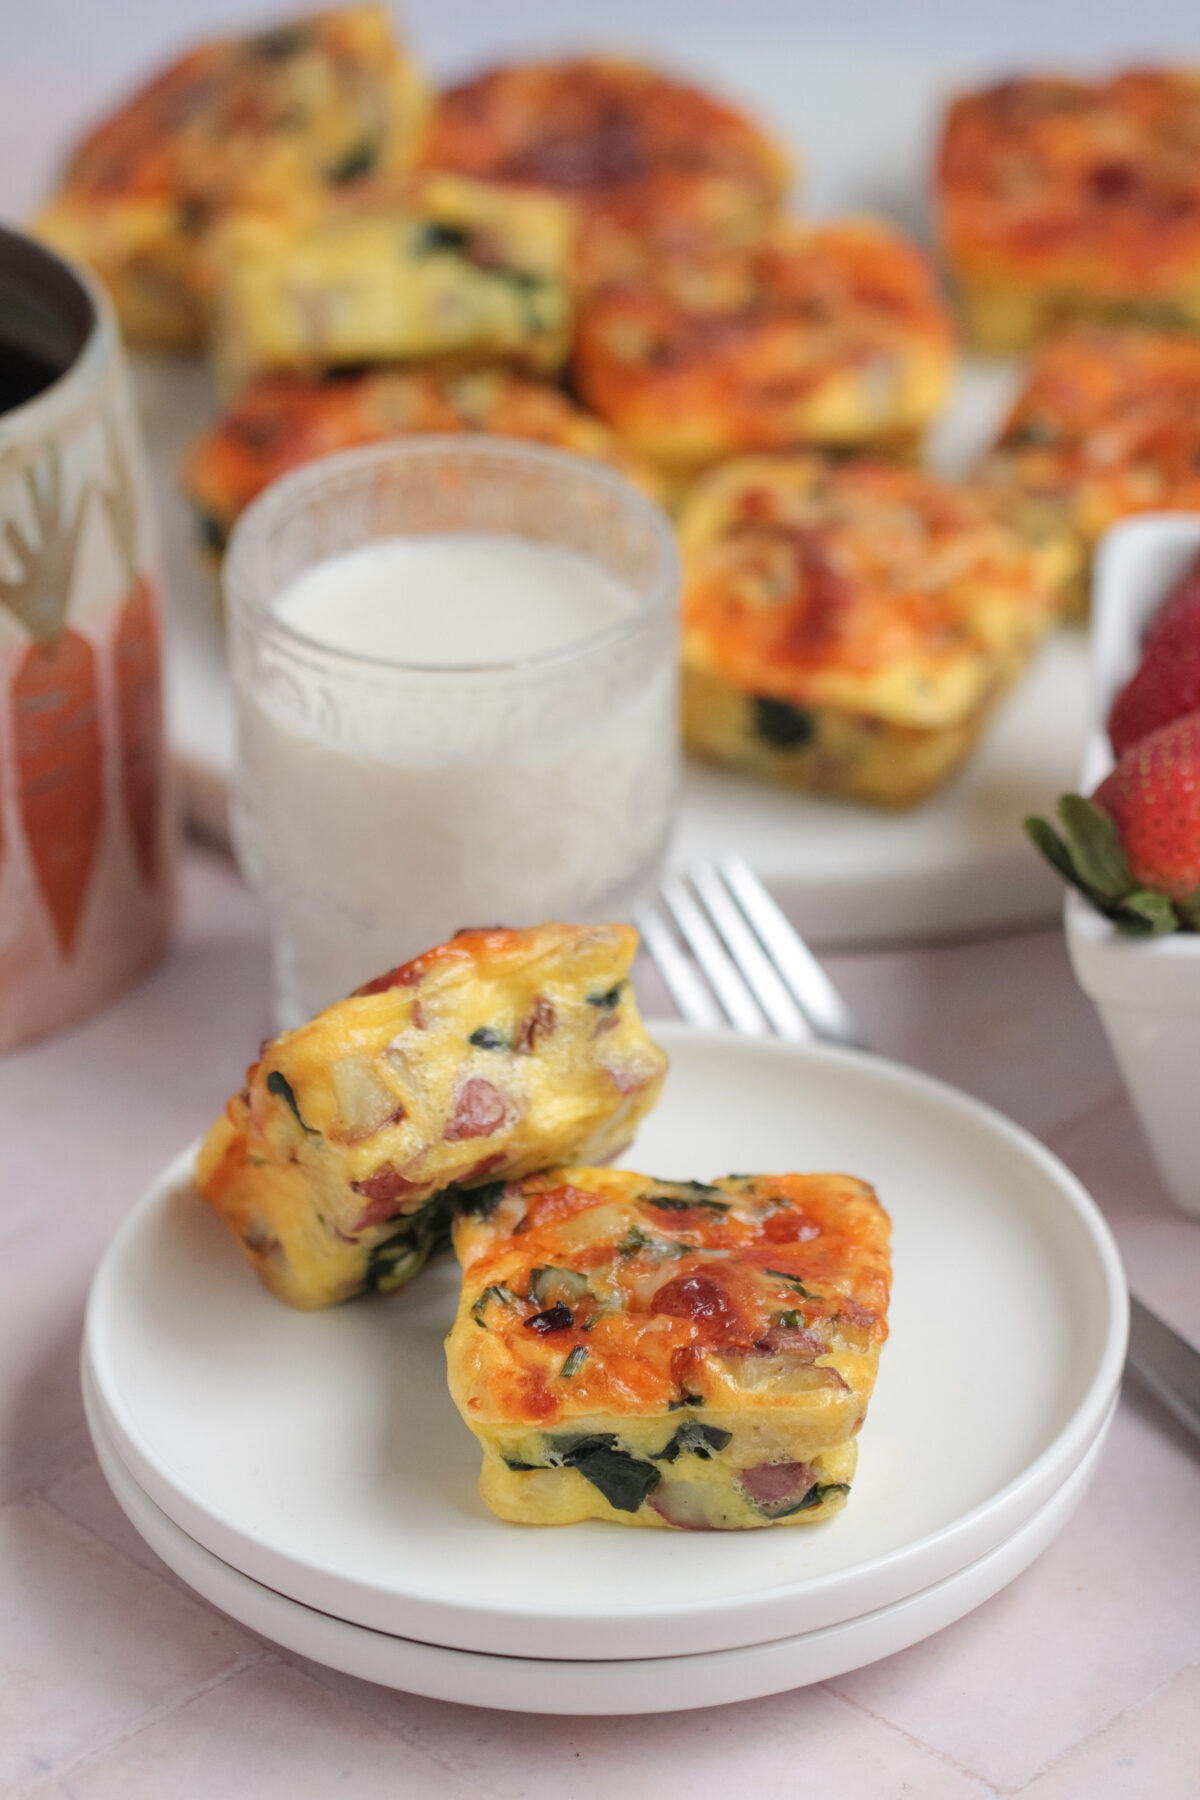 Master irresistibly cheesy and comforting Potato, Cheddar & Chive Bakes with our easy Starbucks inspired recipe for breakfast on the go!